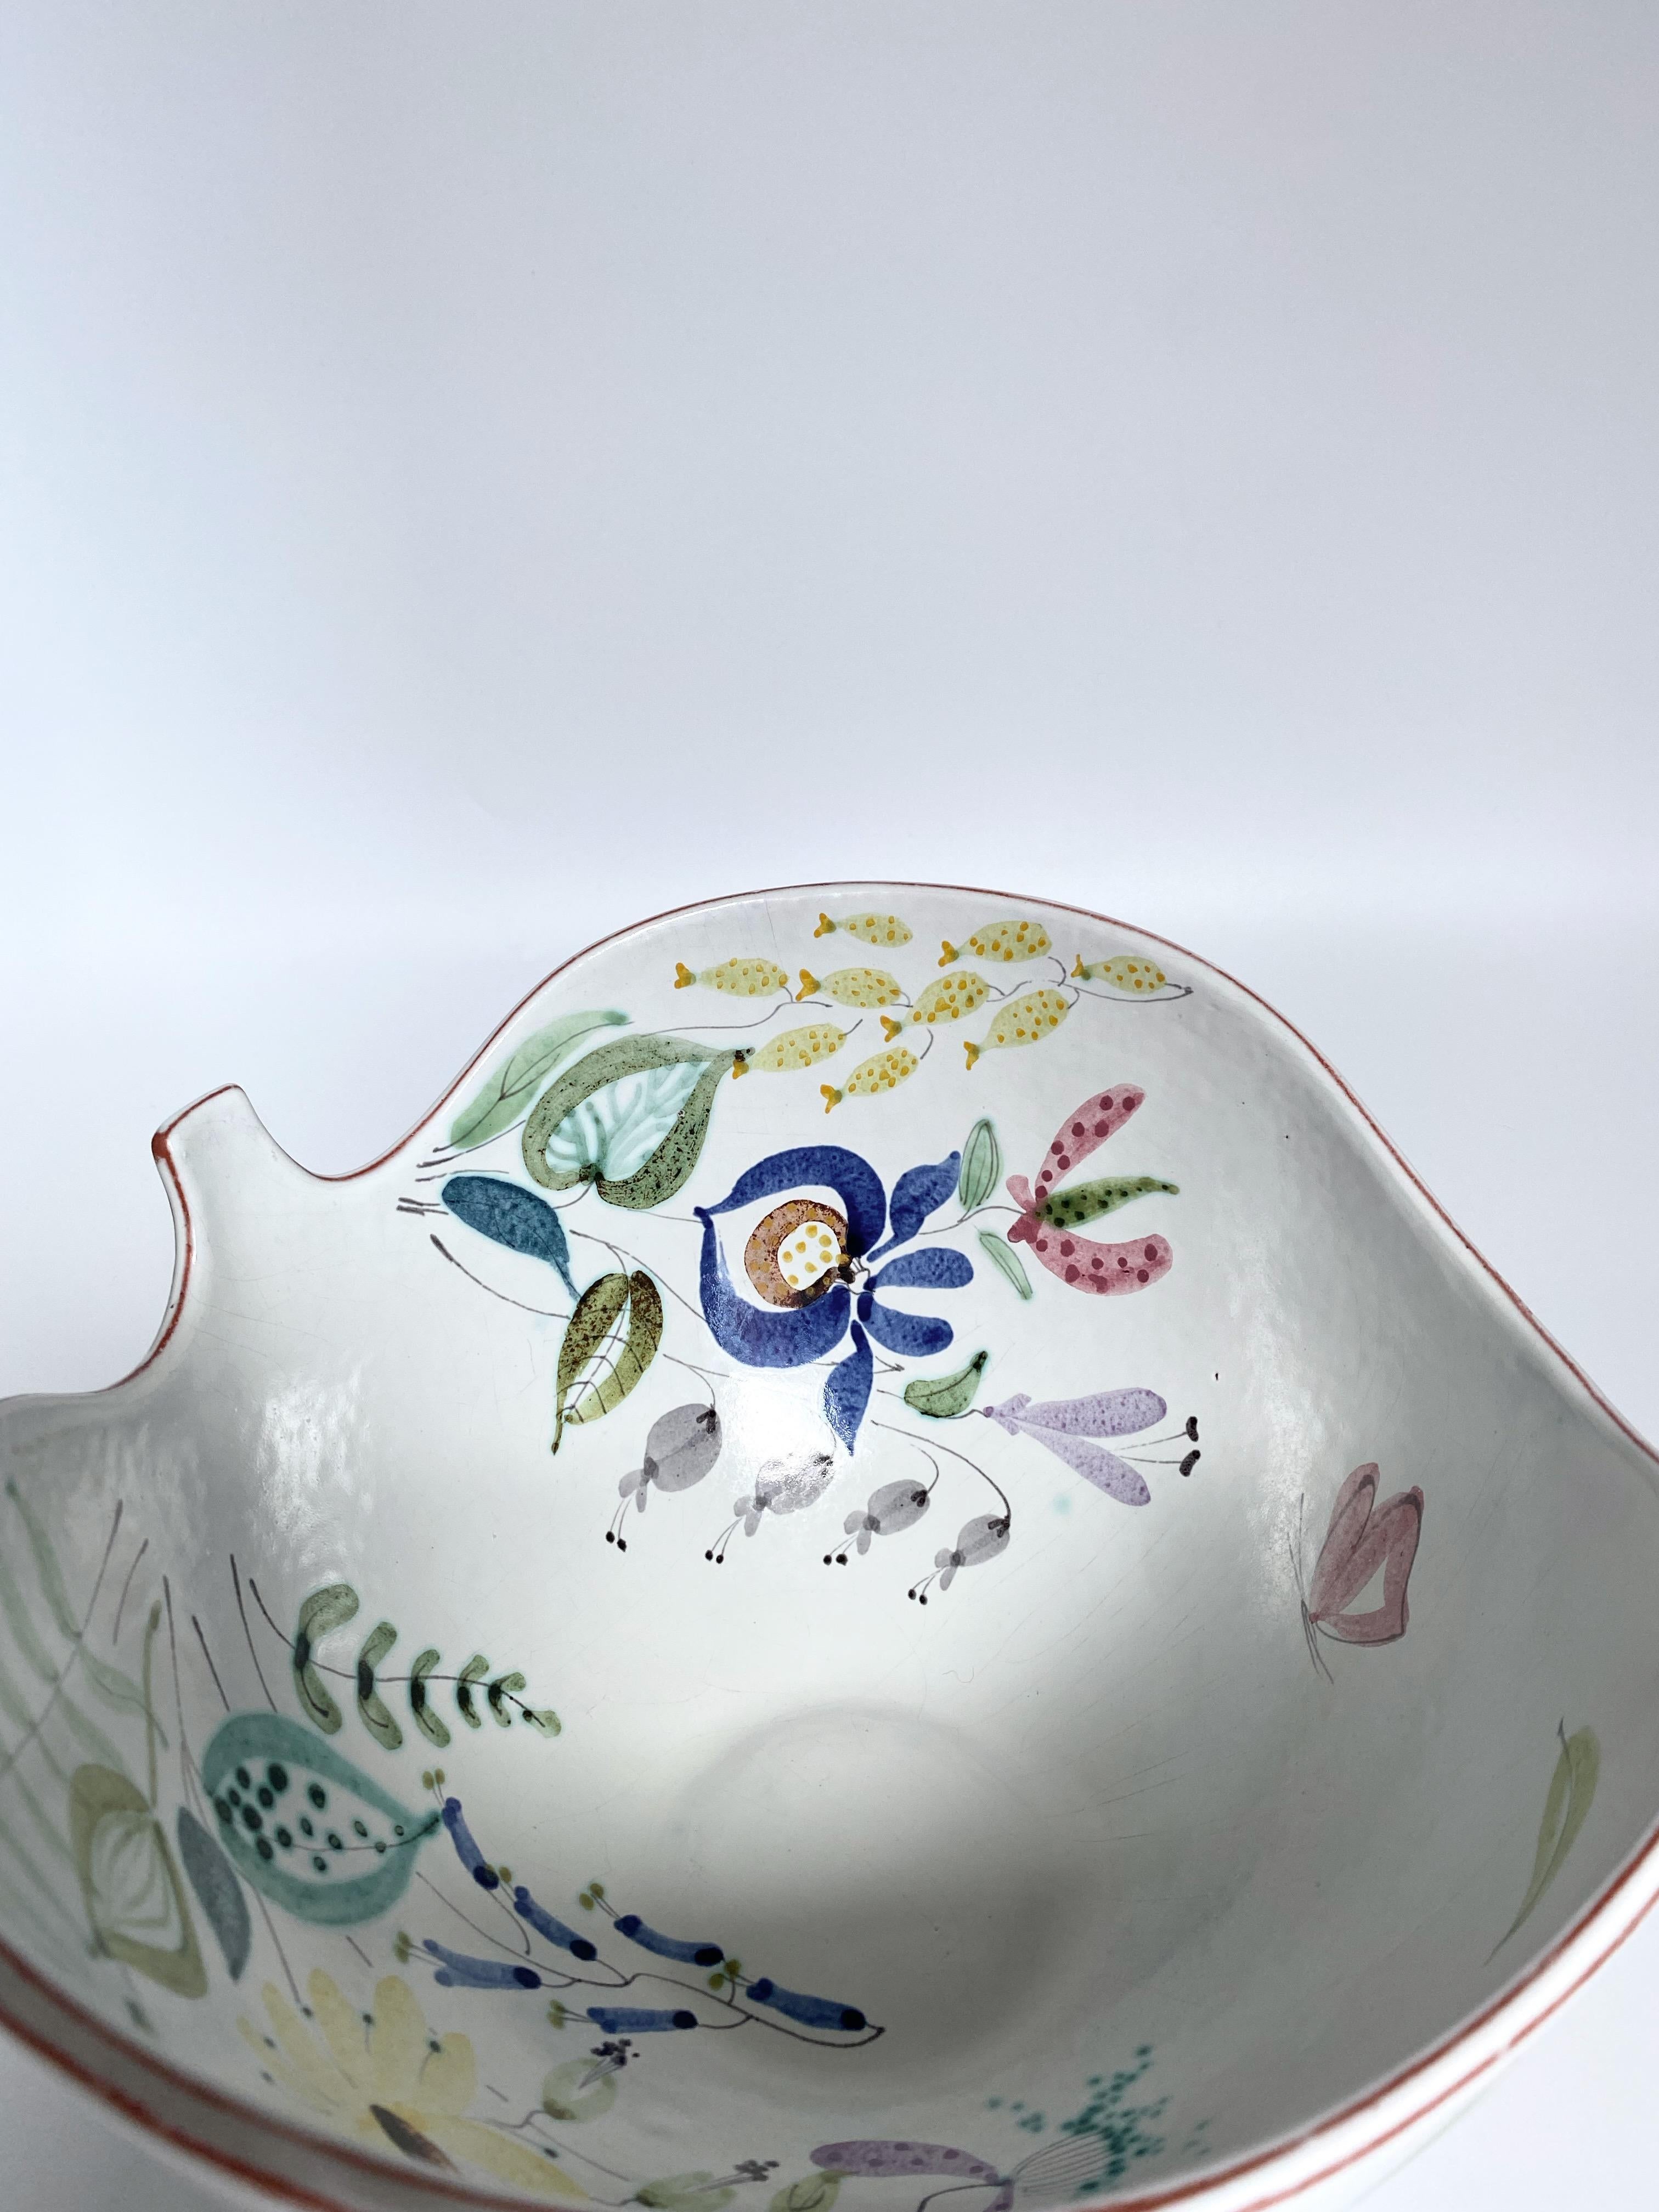 Stunning large Faience ceramic bowl and plate by Stig Lindberg for Gustavsberg. Milky white ceramic featuring a selection of flower motifs in bright colors painted by faience painter Anita Roi after Stig Lindbergs design. In a very good vintage